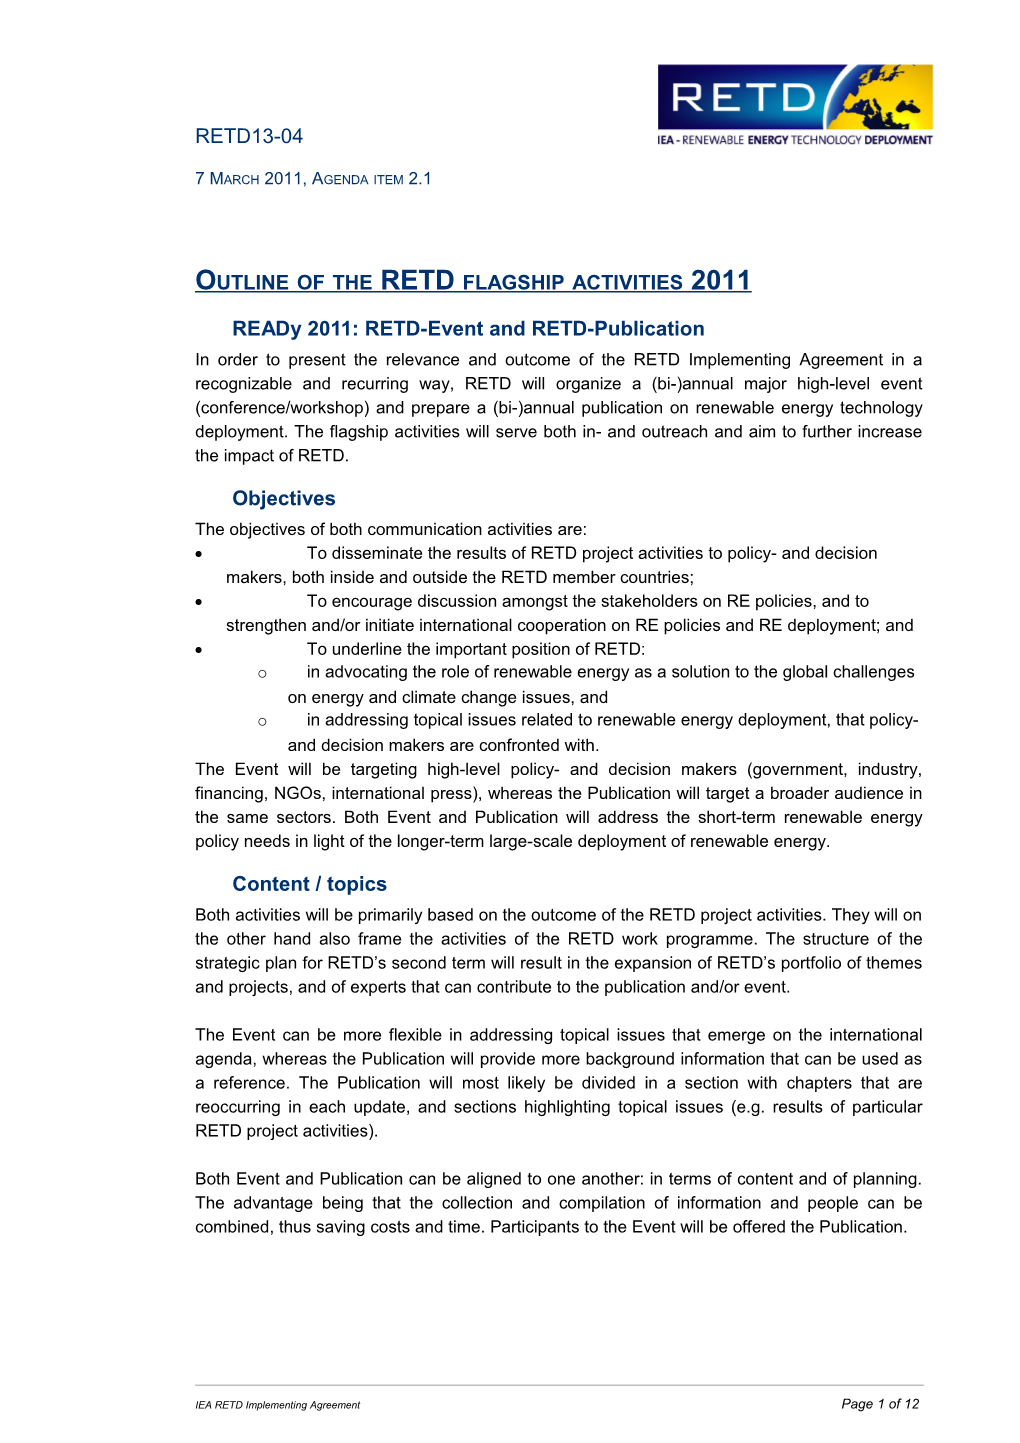 Outline of the RETD Flagship Activities 2011